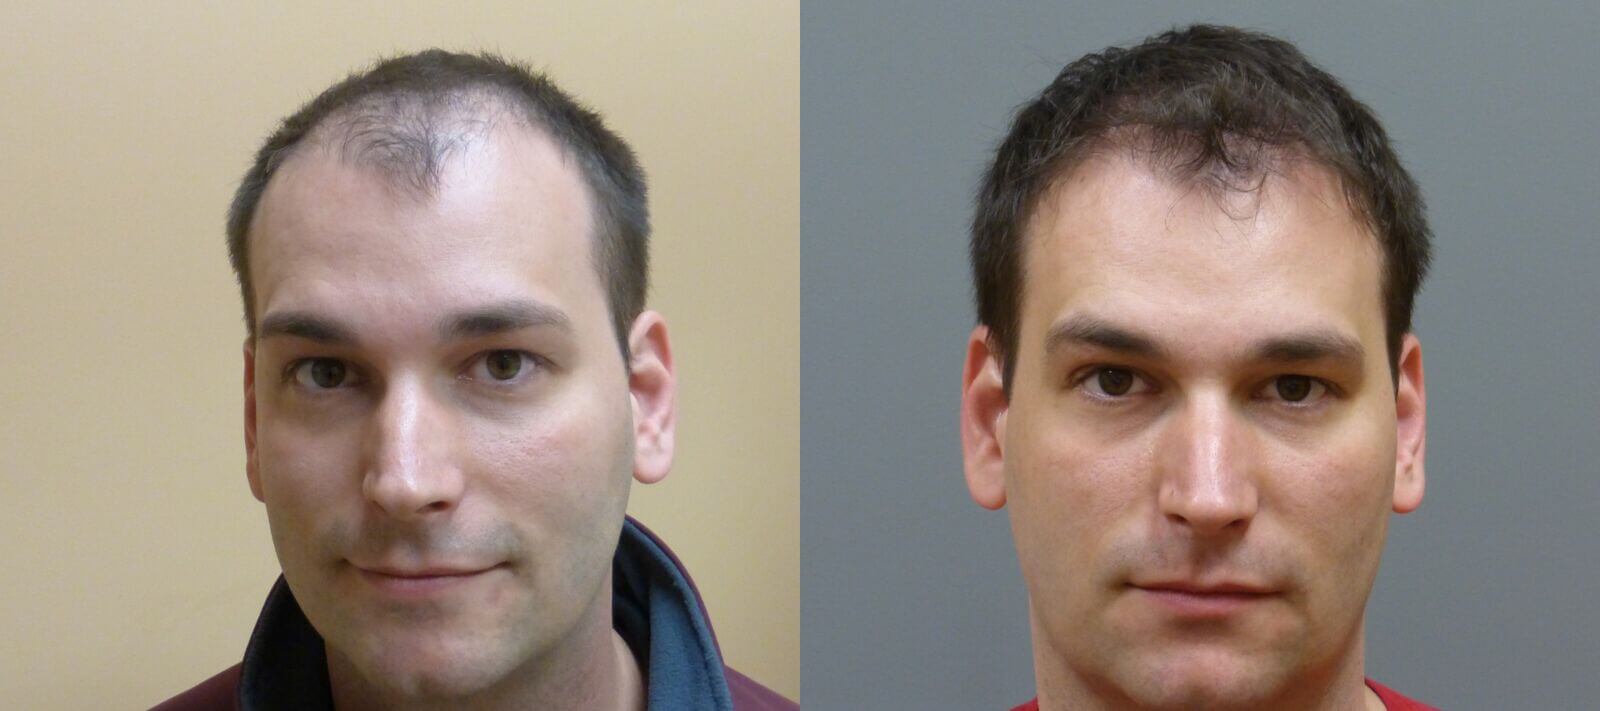 Neograft hair transplant 32 year old 2,000 grafts before and 7 months post-op